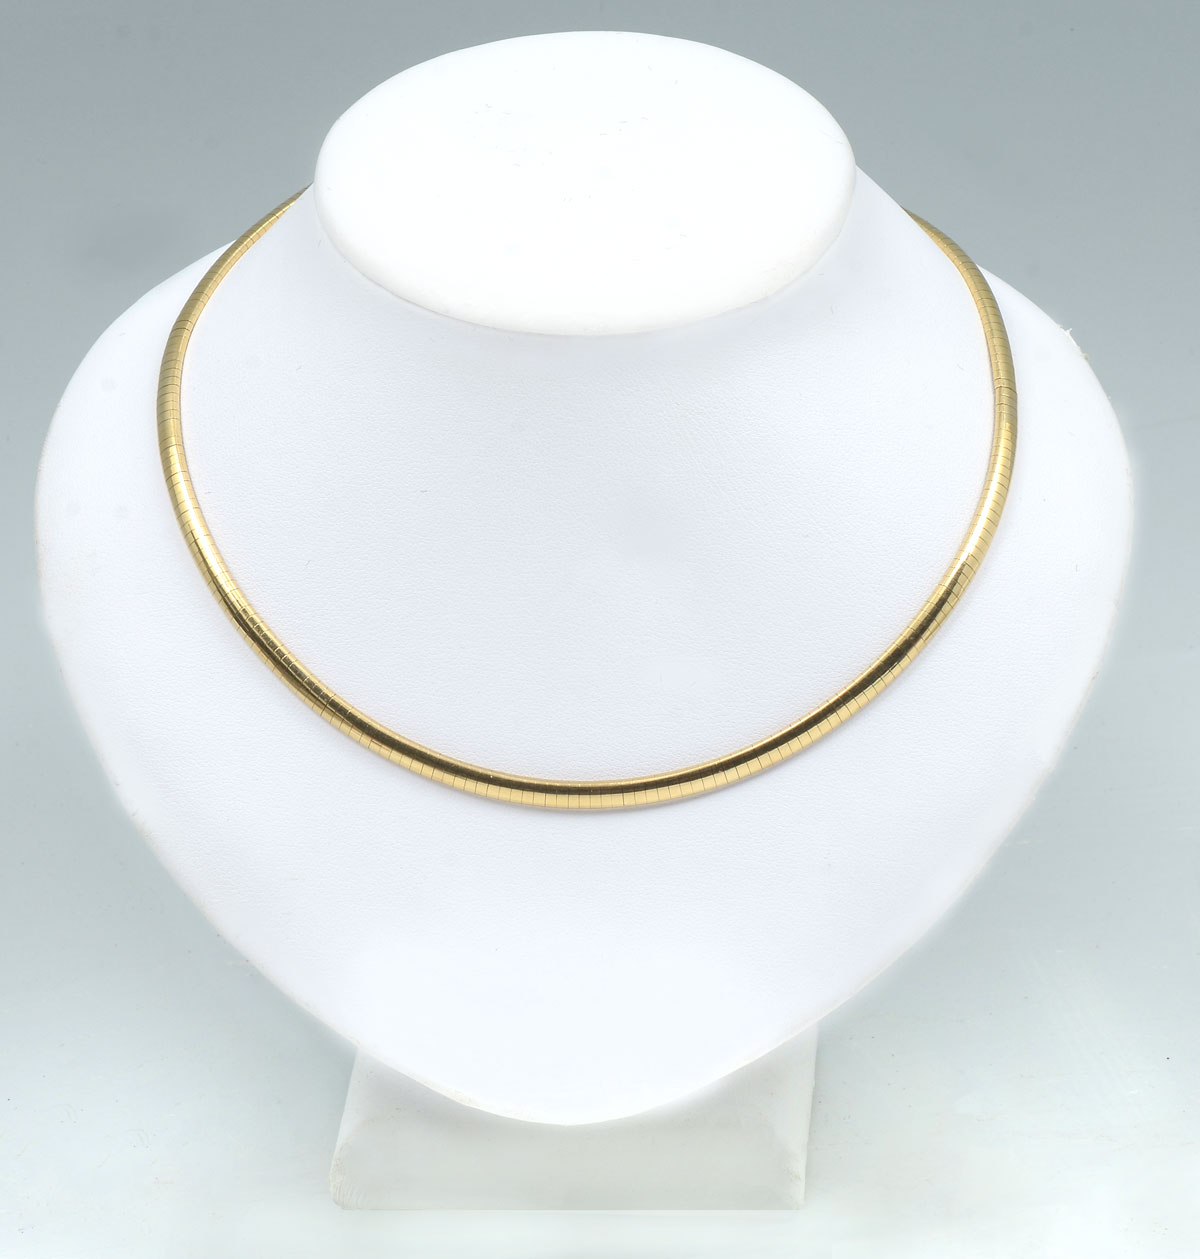 14K GOLD OMEGA NECKLACE: 14K yellow